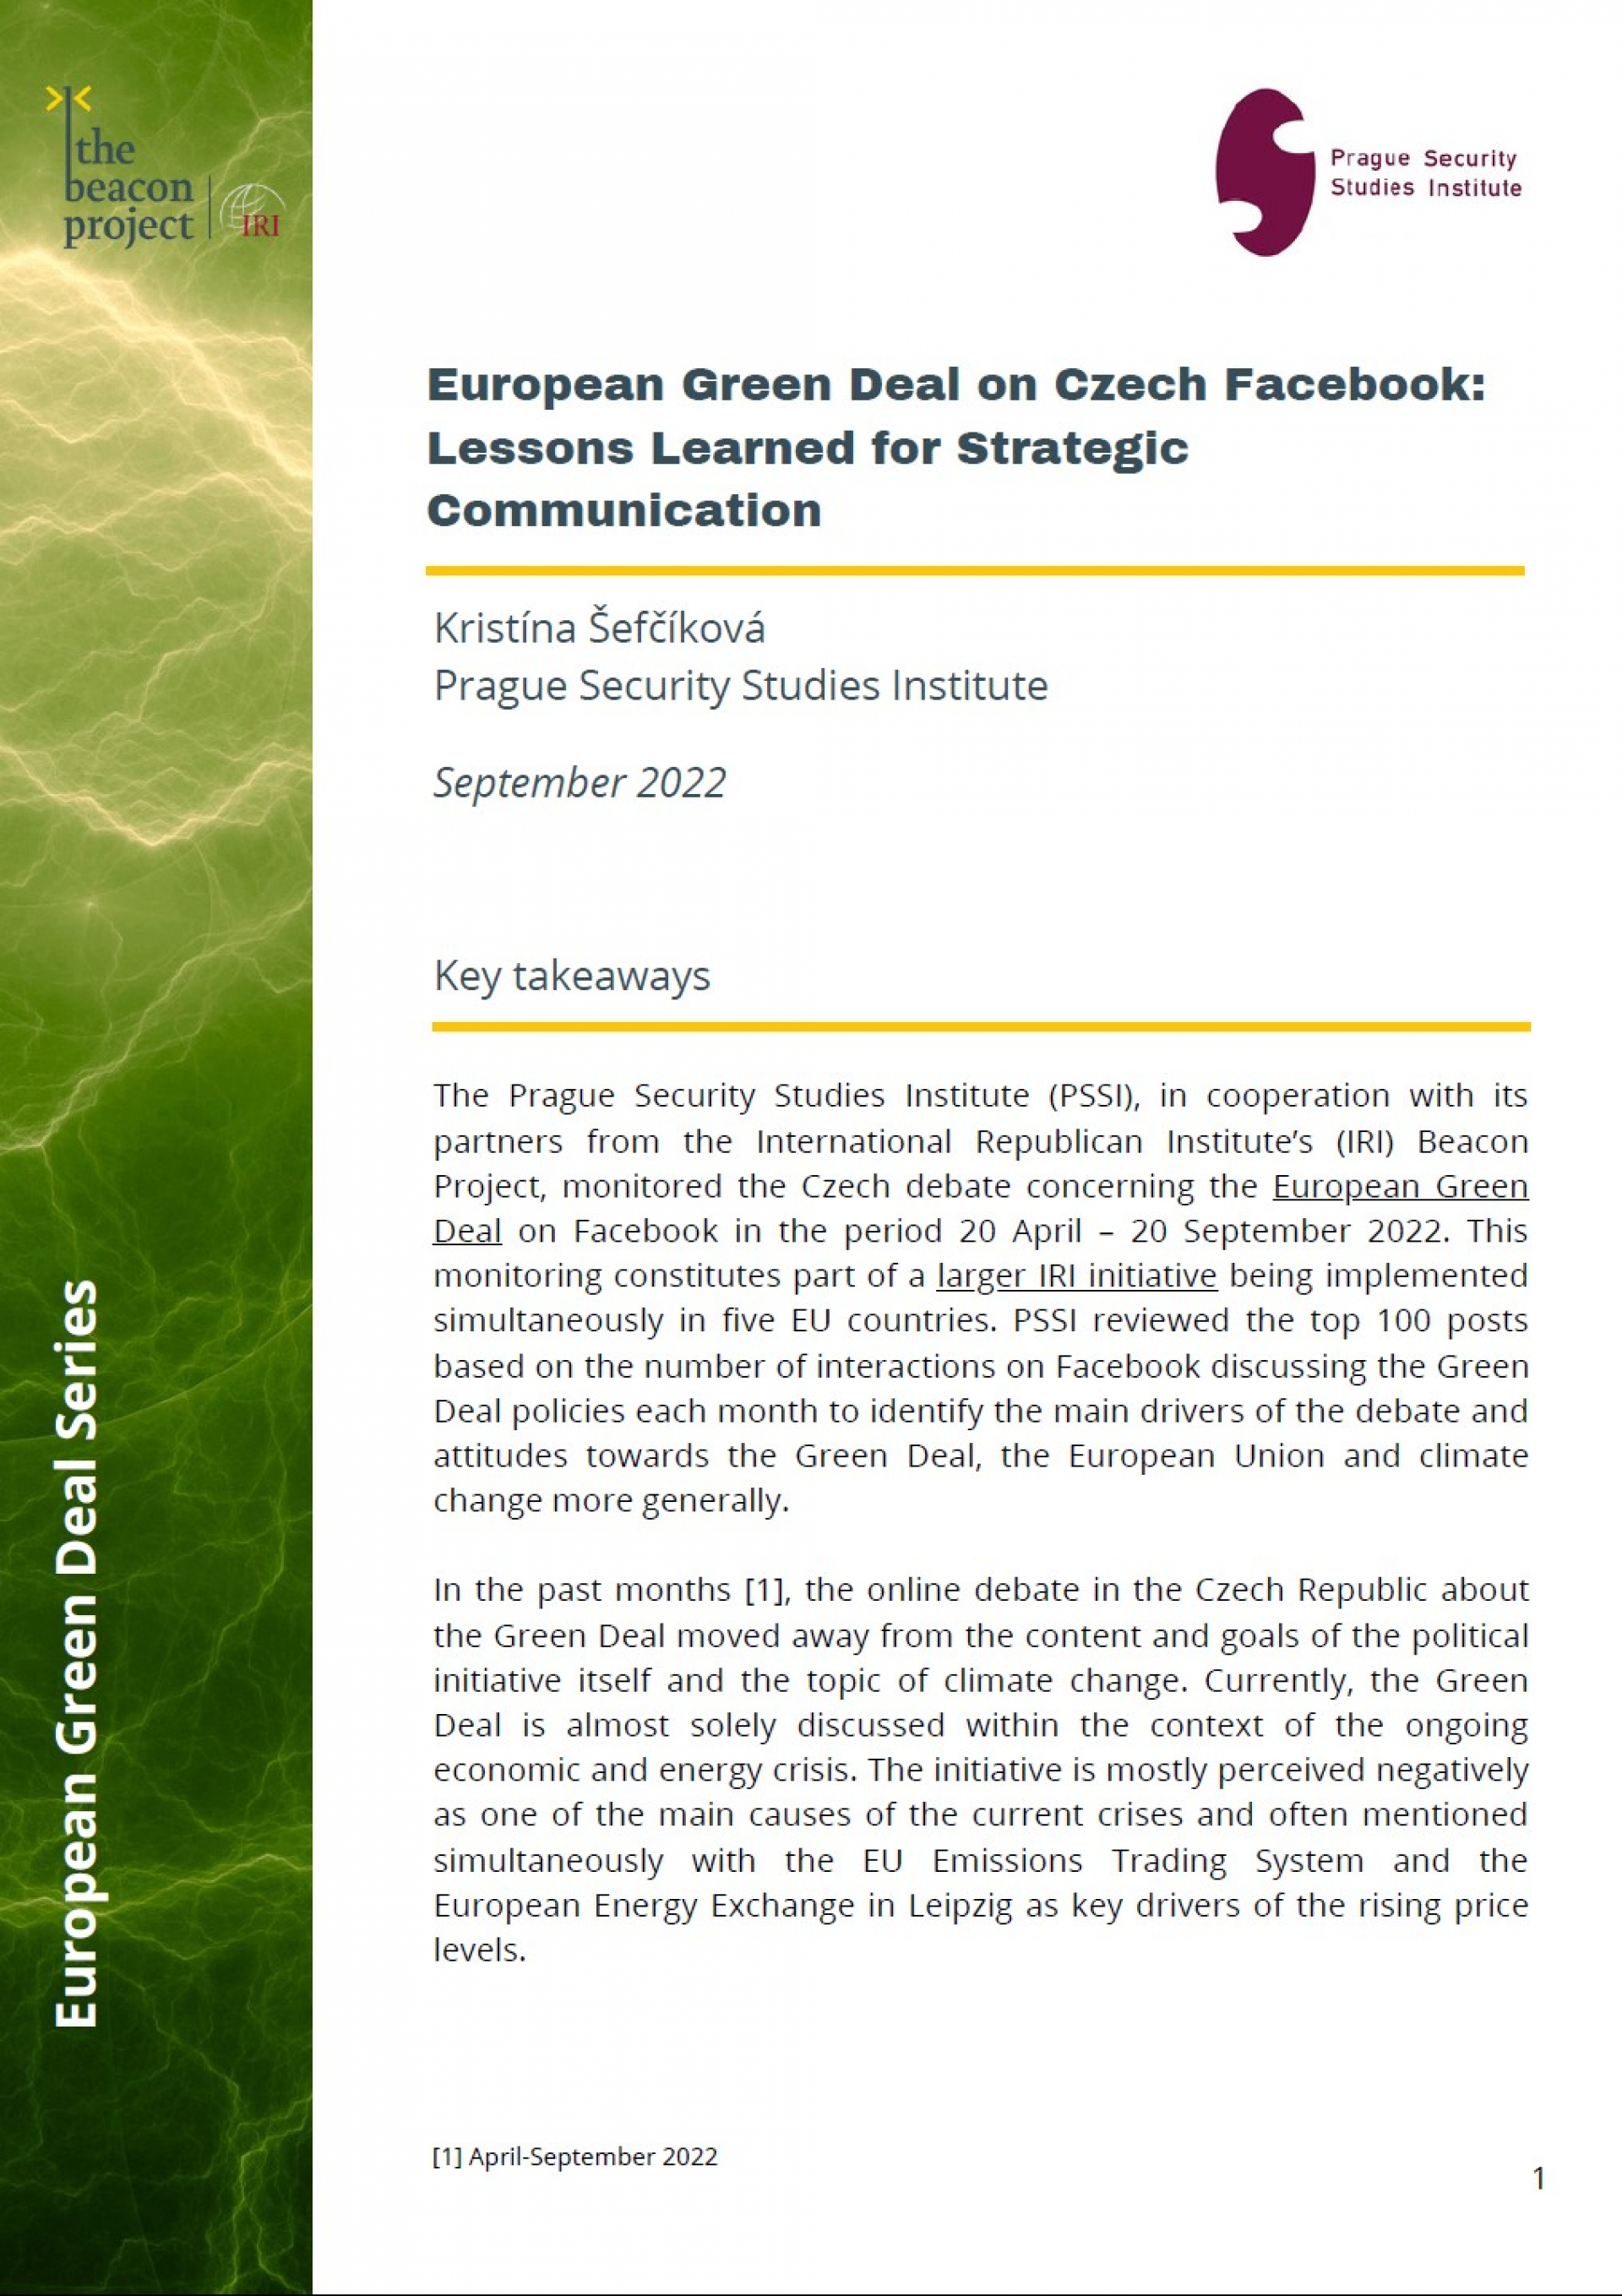 European Green Deal on Czech Facebook Lessons Learned for Strategic CommunicationCoverpage2